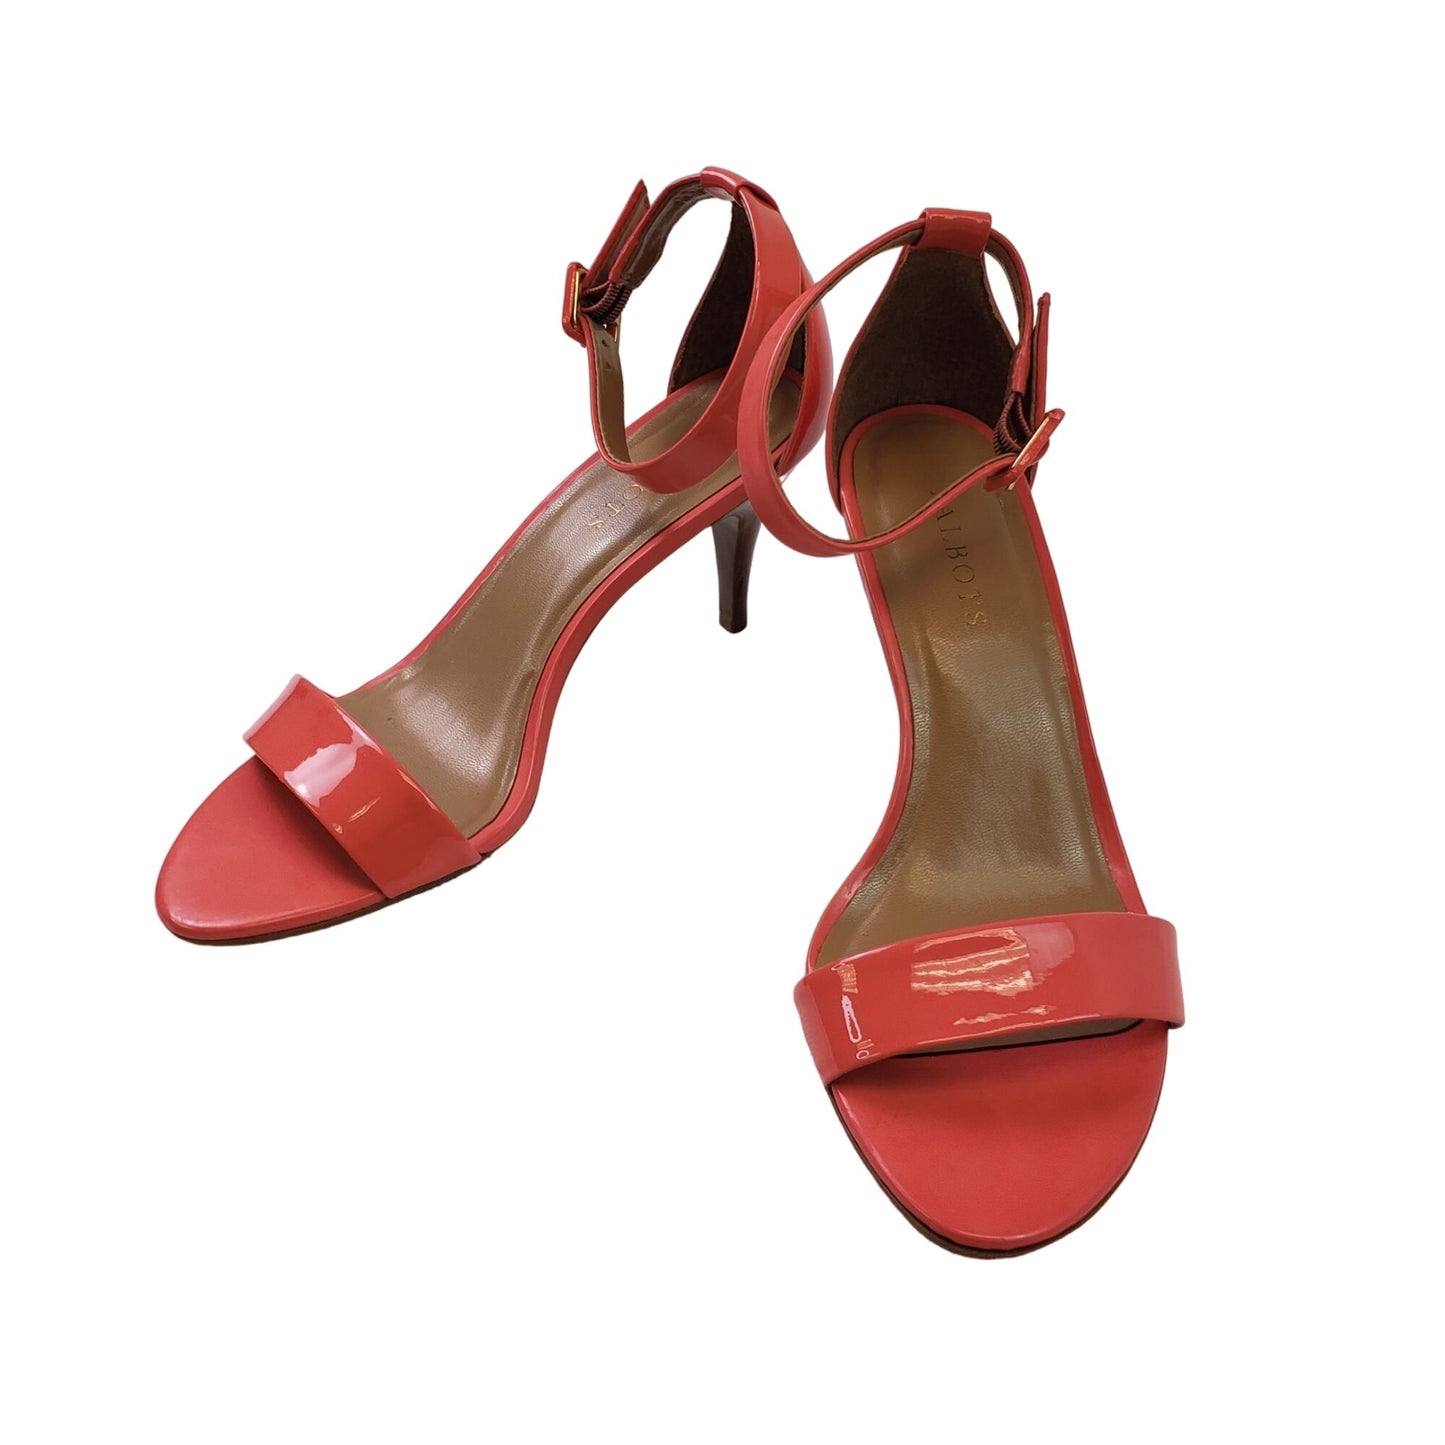 Talbots Patent Leather Ankle Strap Heels in a Coral Color Size 8.5